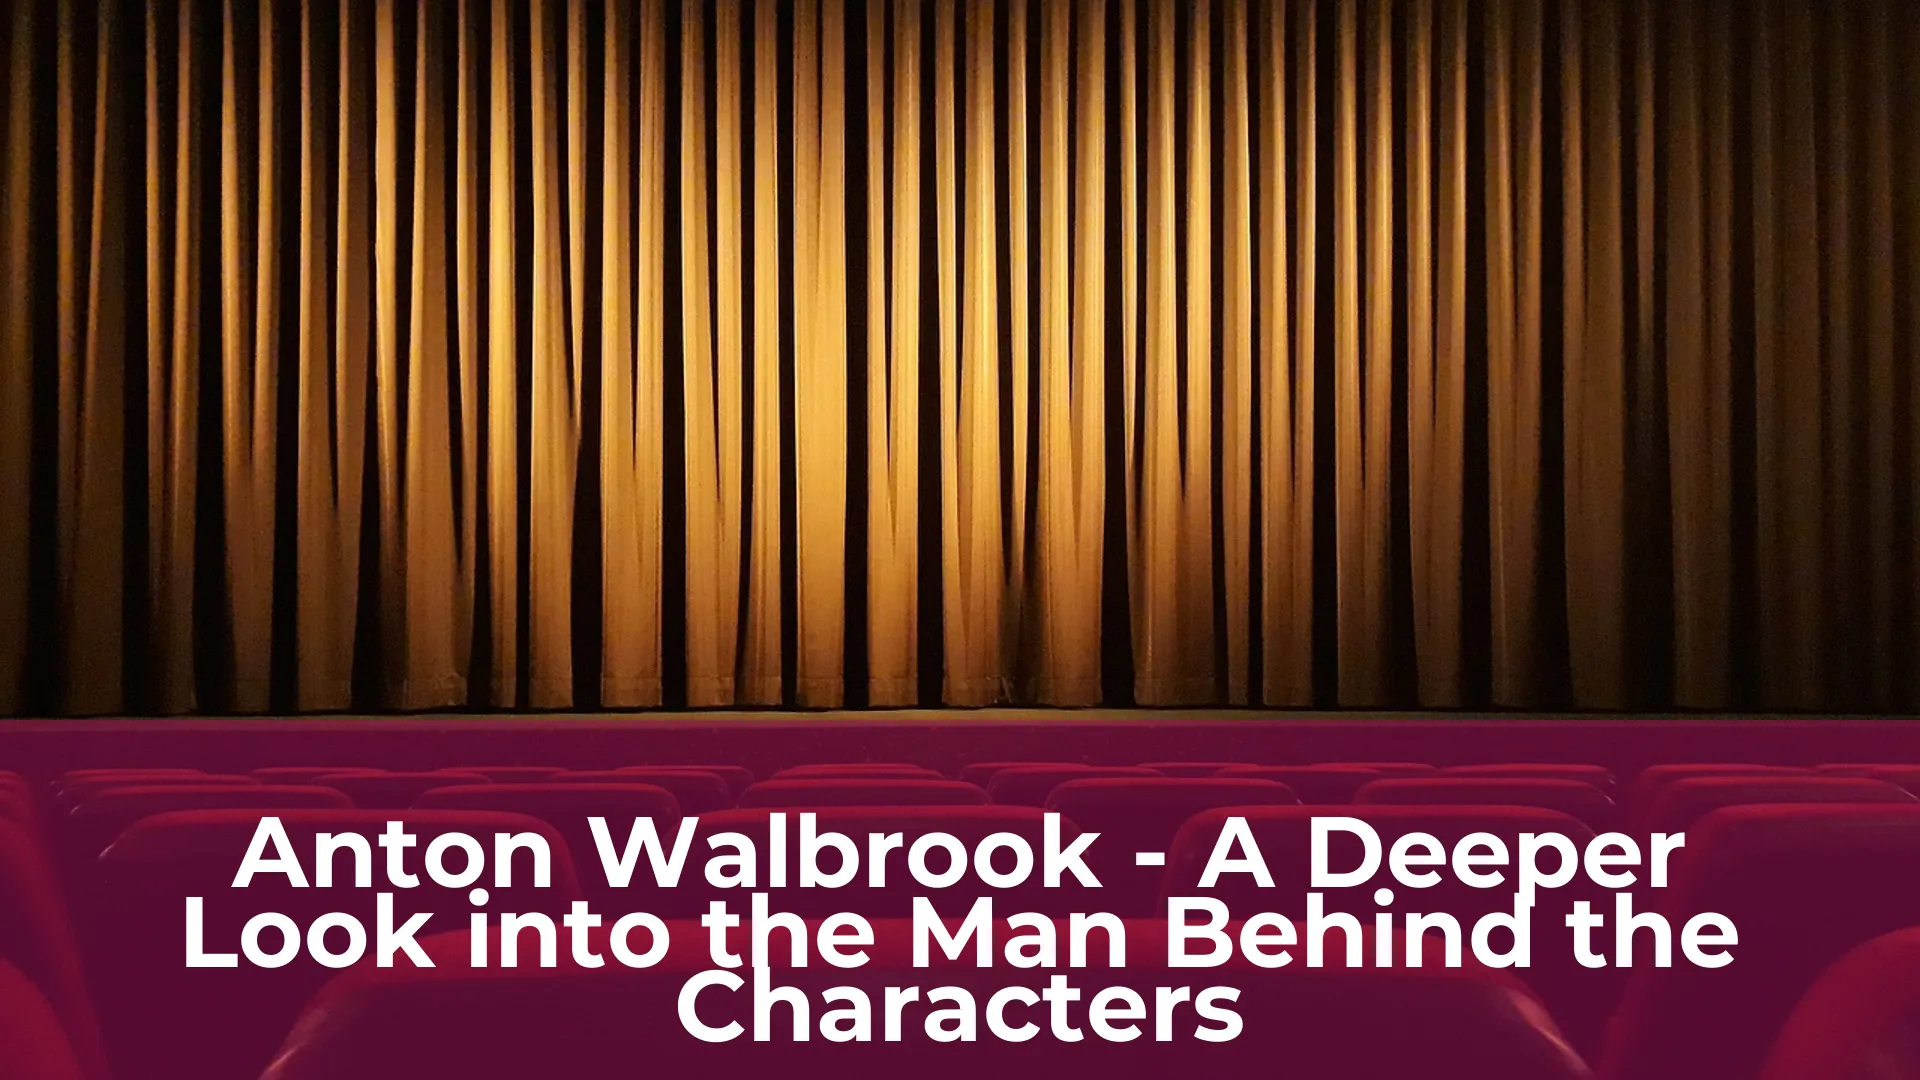 Anton walbrook a deeper look into the man behind the characters